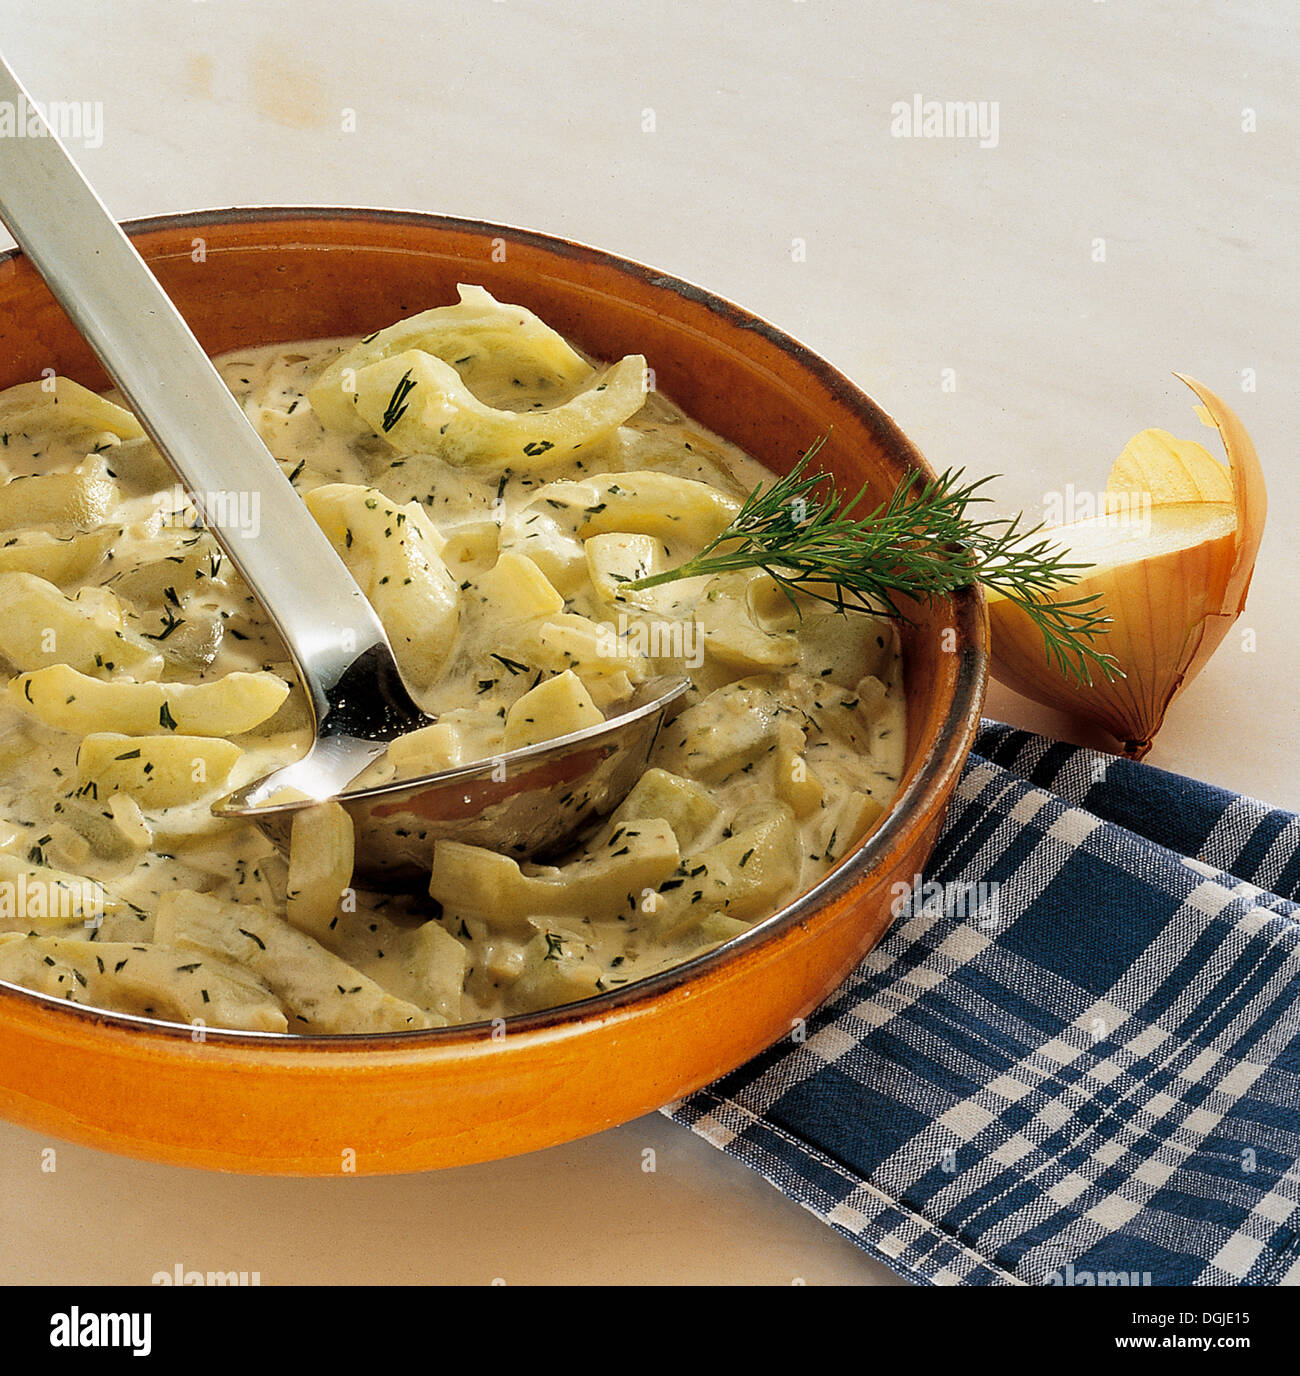 Sweet and sour braised cucumber, dill, cream and vegetables, Germany. Stock Photo